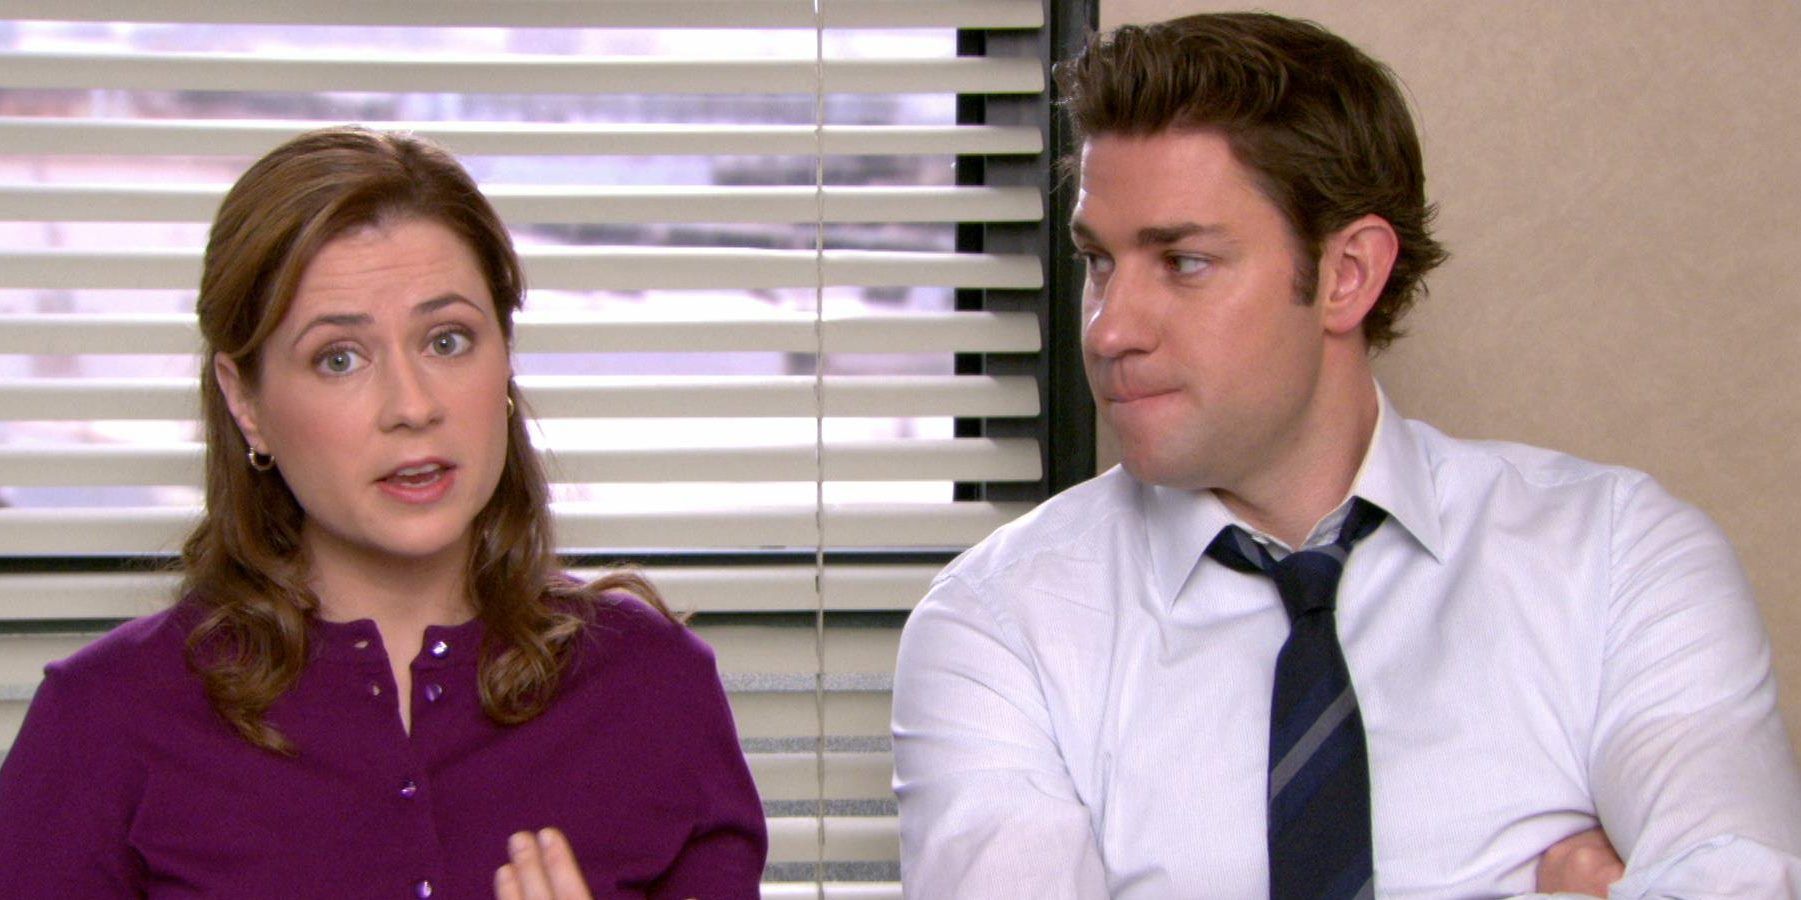 The Office: 20 Things That Make No Sense About Jim And Pam's Relationship